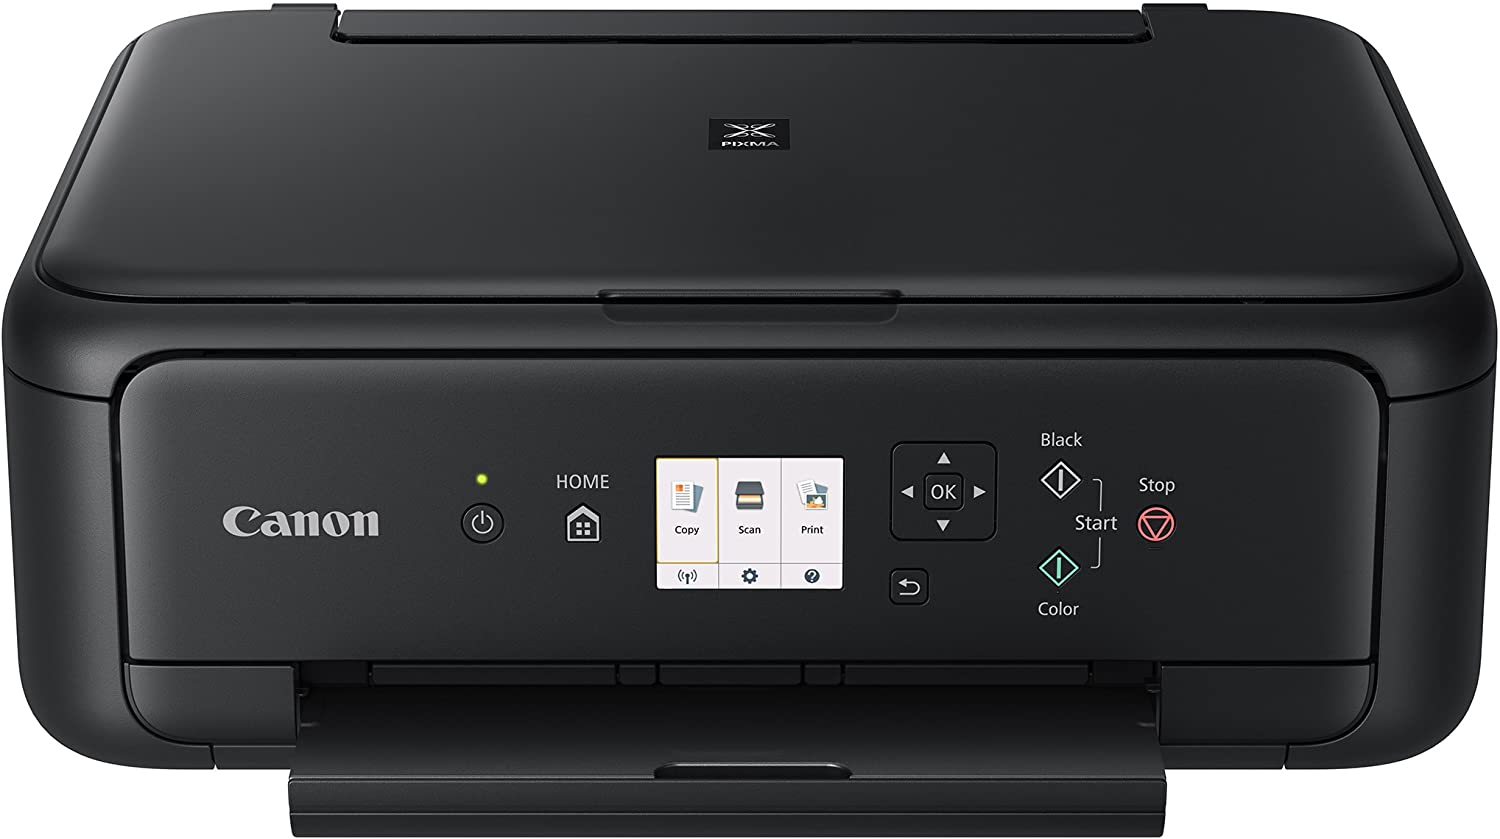 Canon PIXMA TS5120 Wireless All-In-One Mobile and Tablet Printing Printer with Scanner and Copier, Black - image 3 of 3